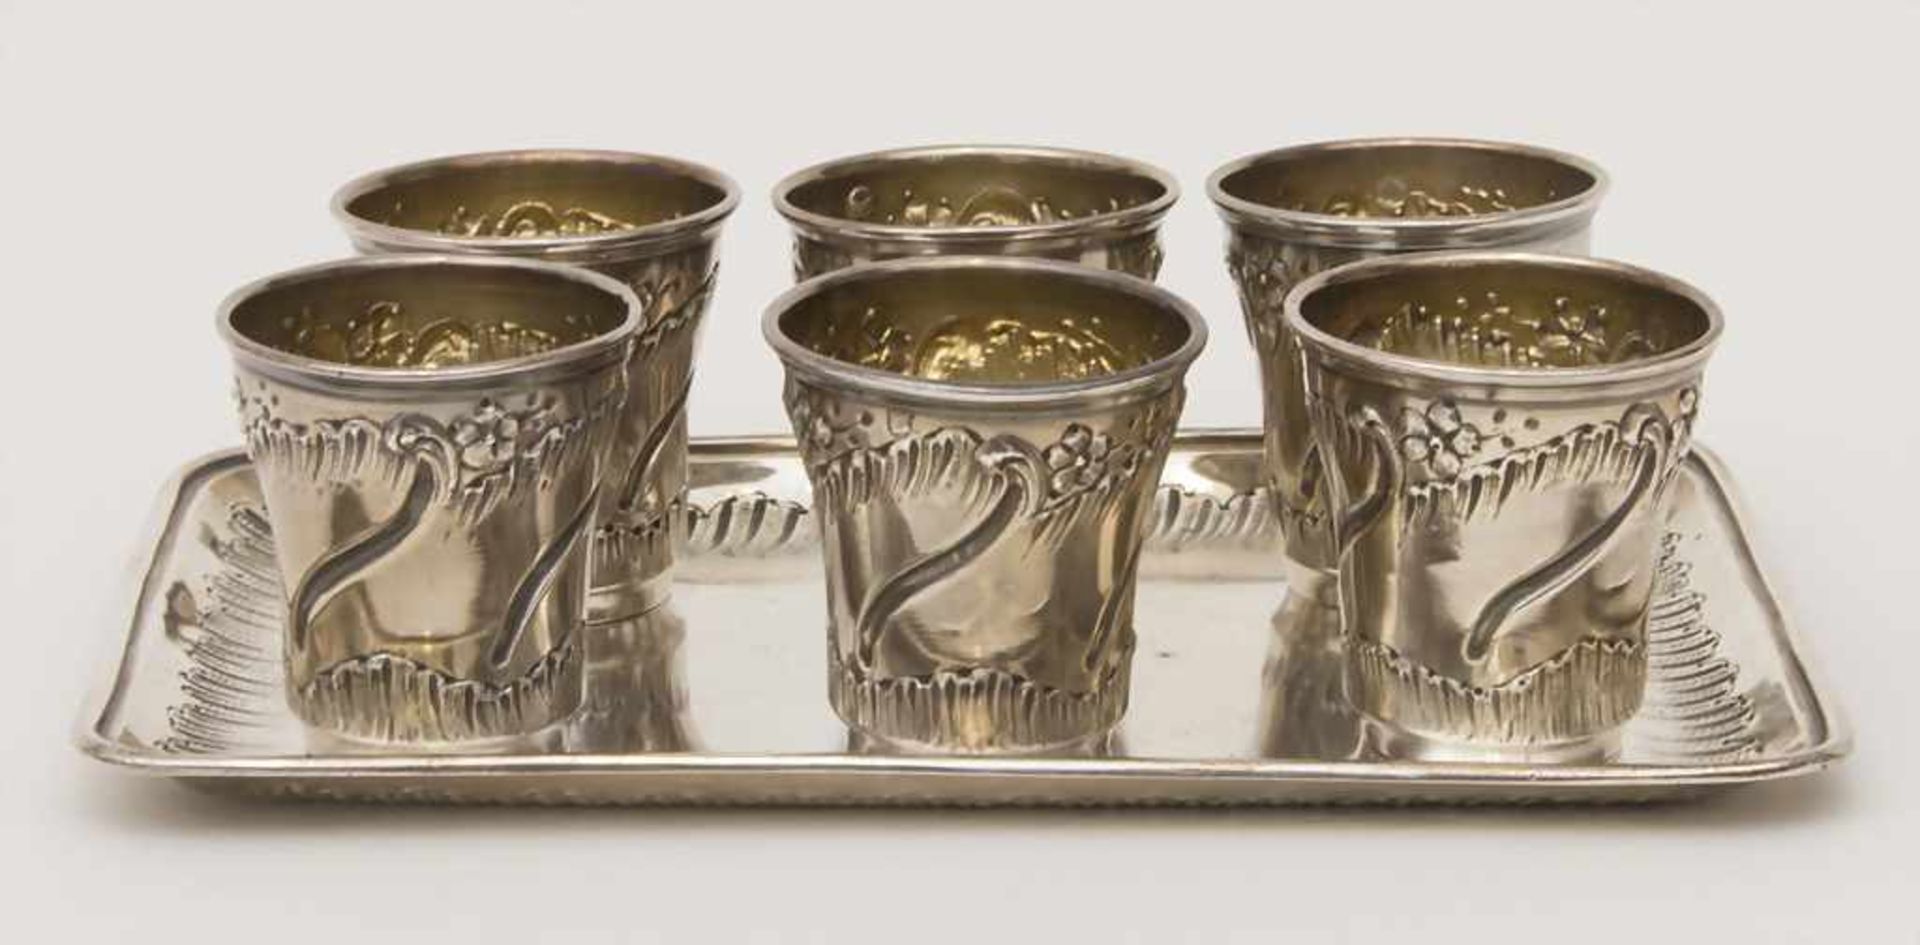 6 Schnapsbecher und Tablett in Schatulle / 6 silver cups and tray with case, Henry Soufflot, - Image 3 of 19